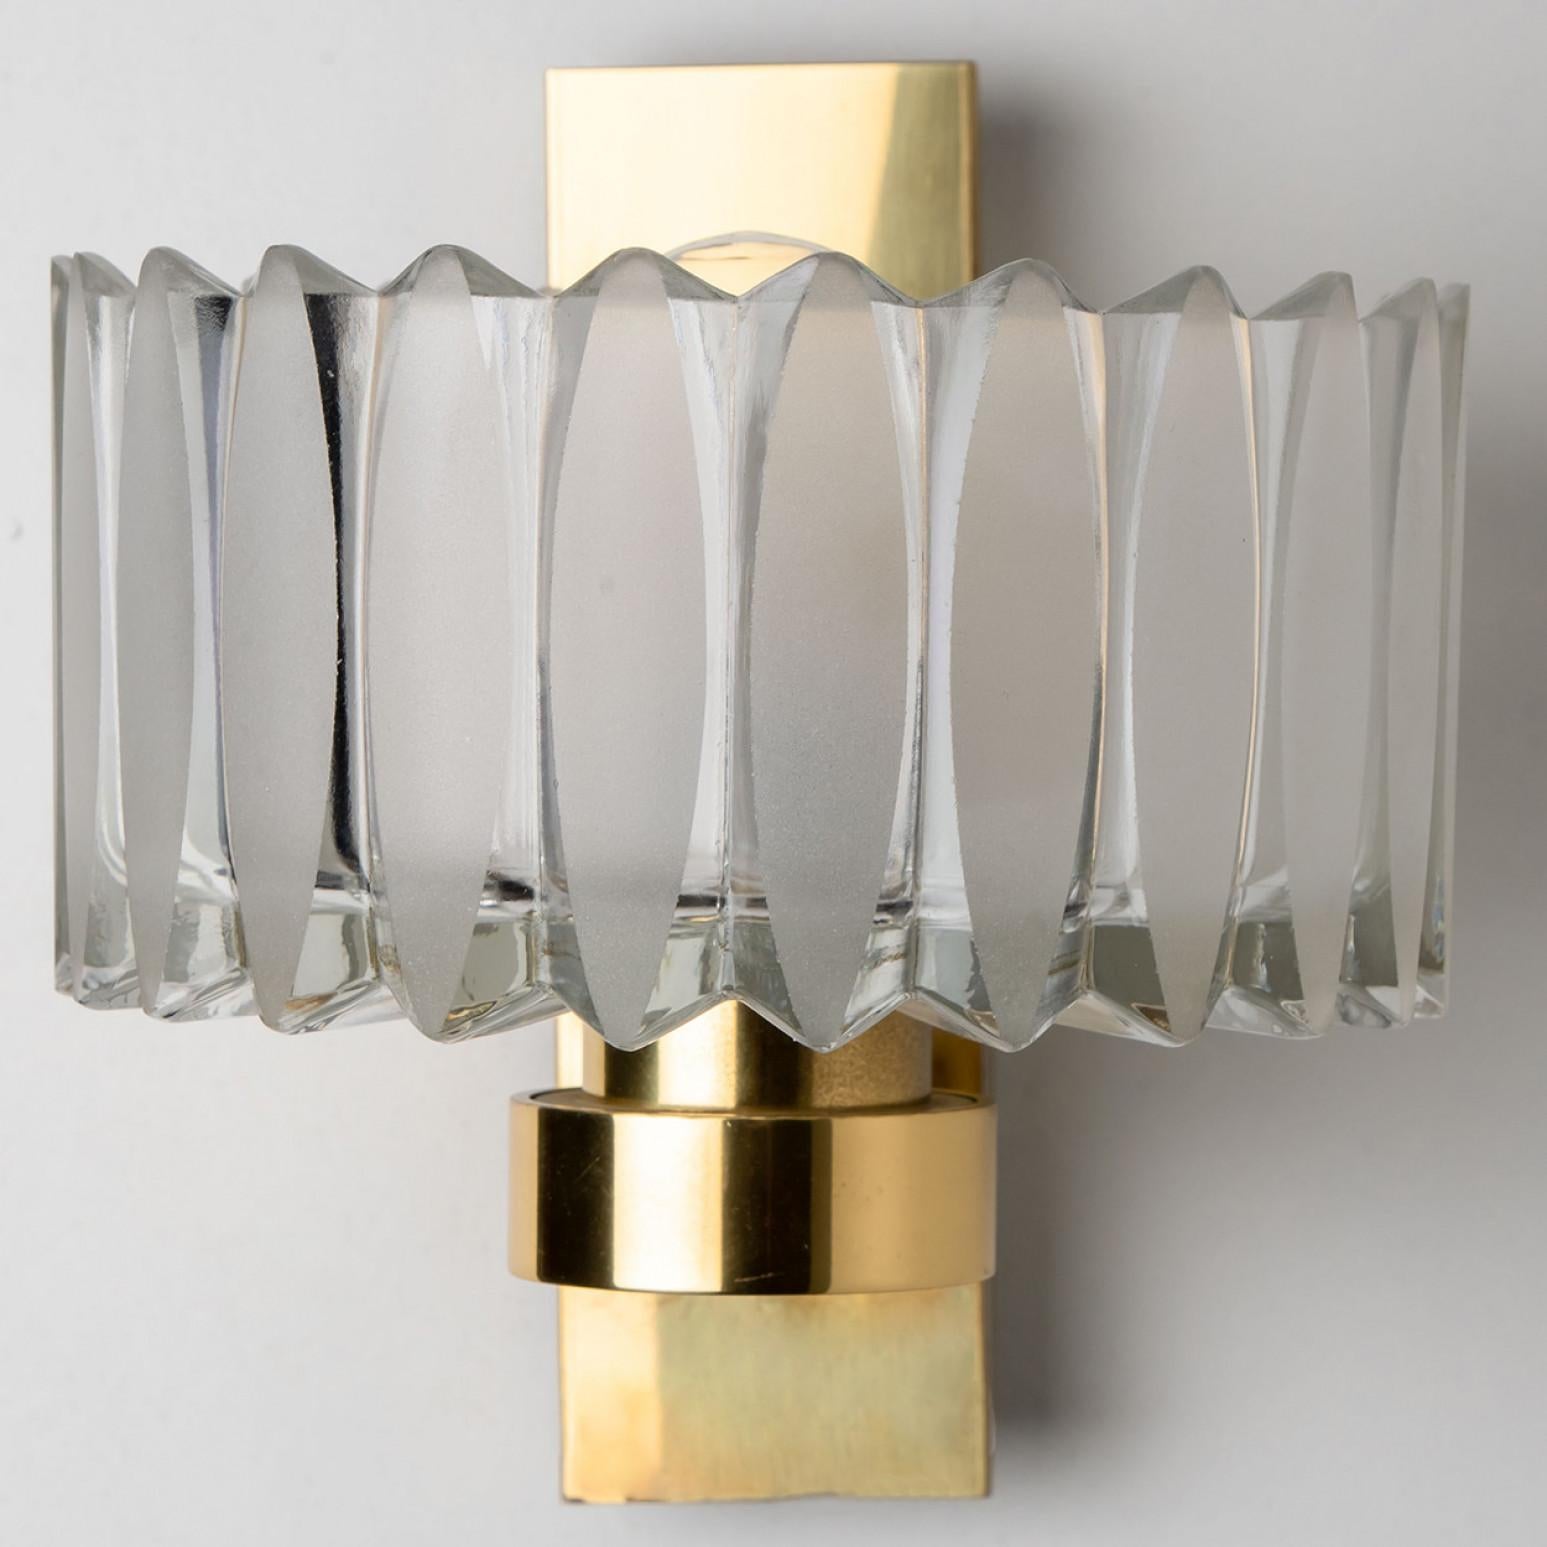 1 of the 2 Sets Hillebrand Brass and Glass Wall Light Fixtures, 1970s For Sale 1